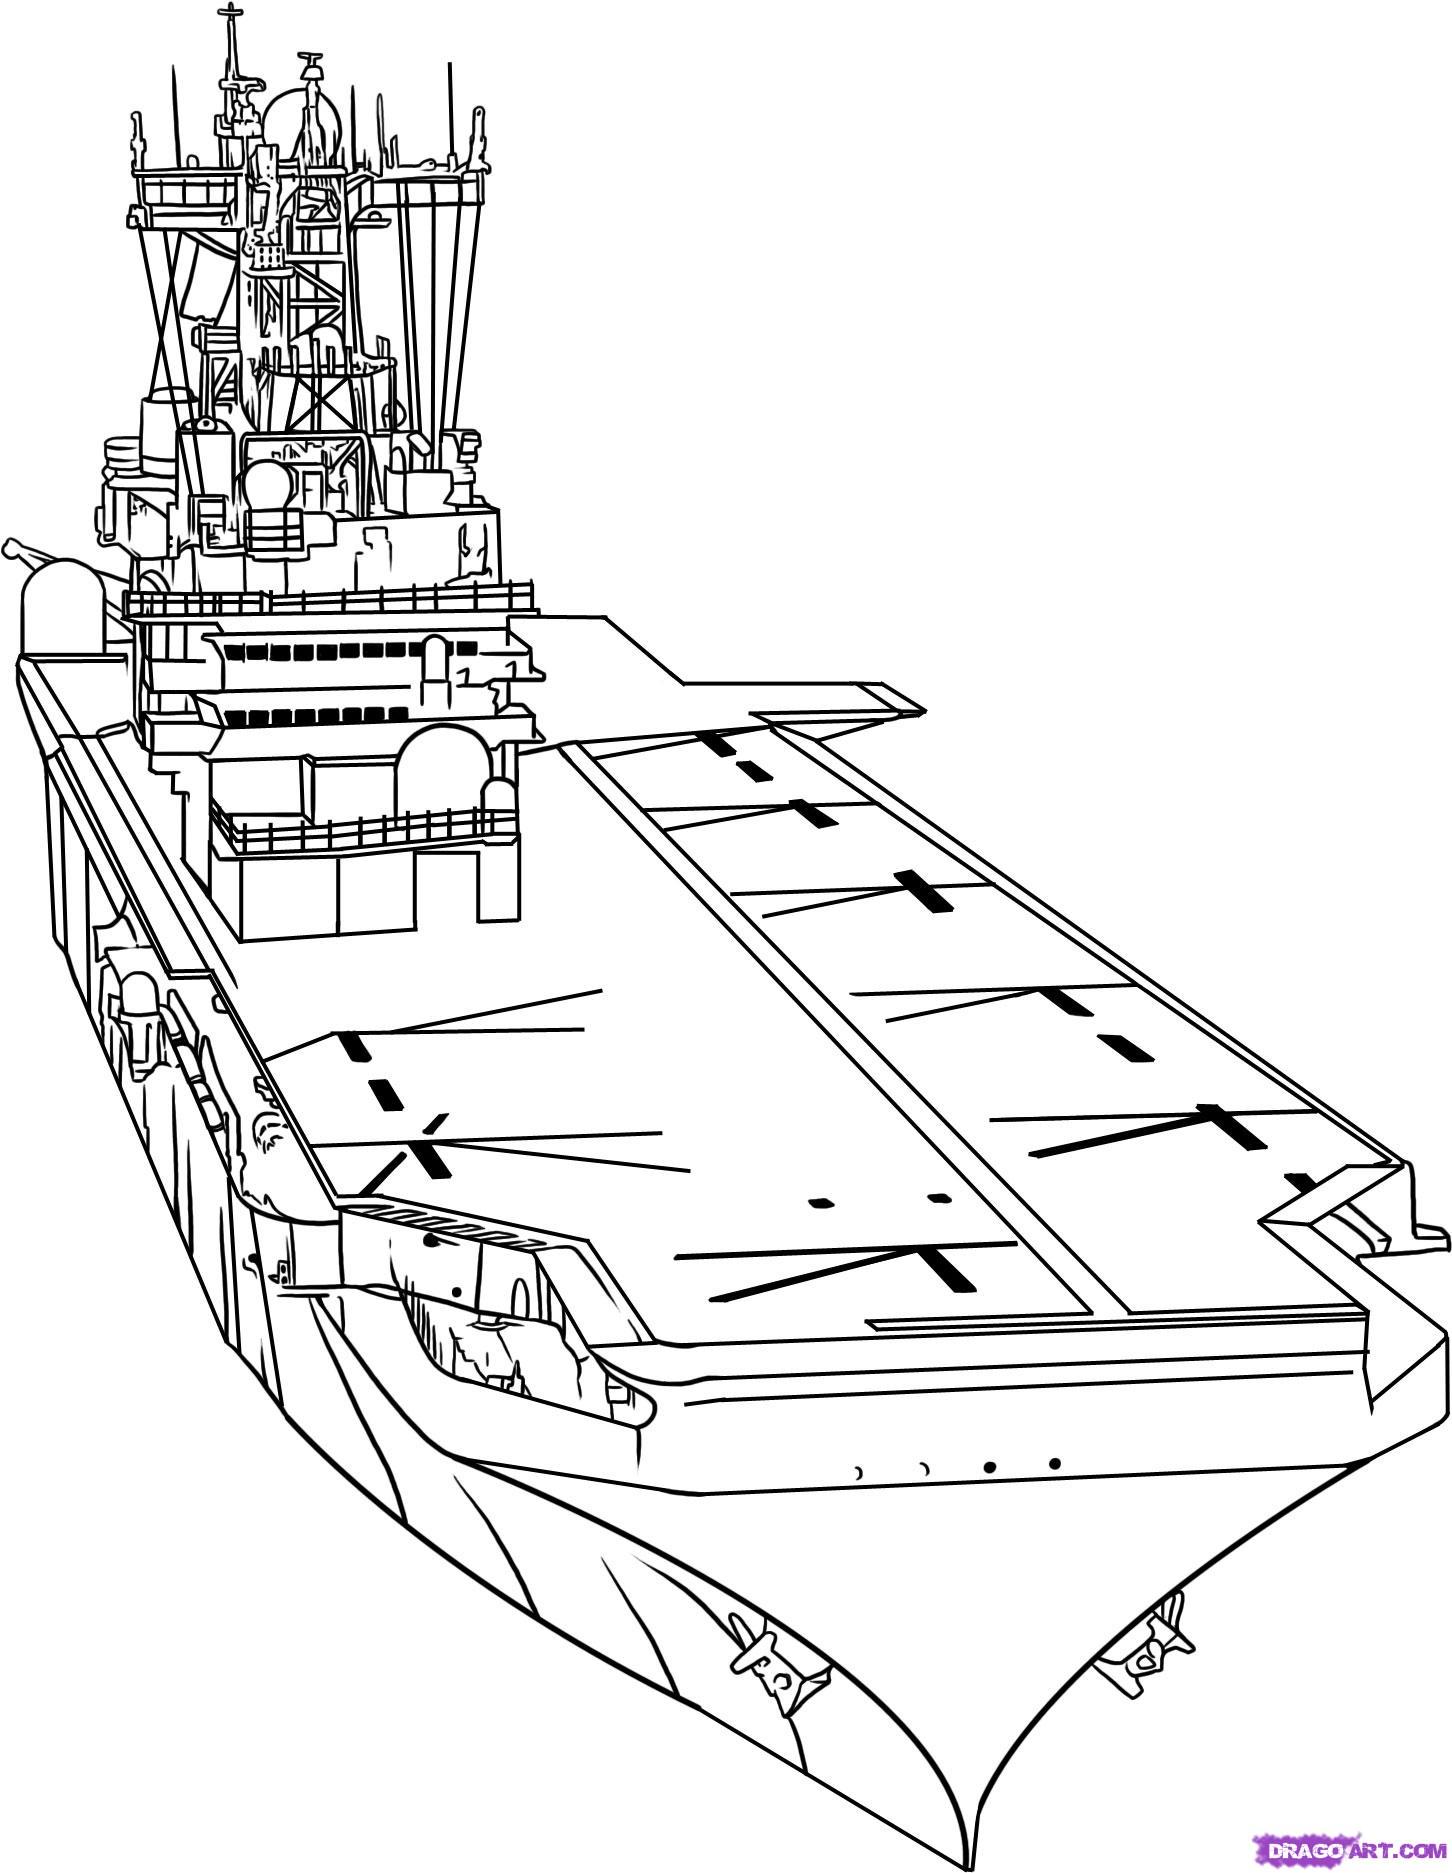 Cool Aircraft Carrier 1 Coloring Page